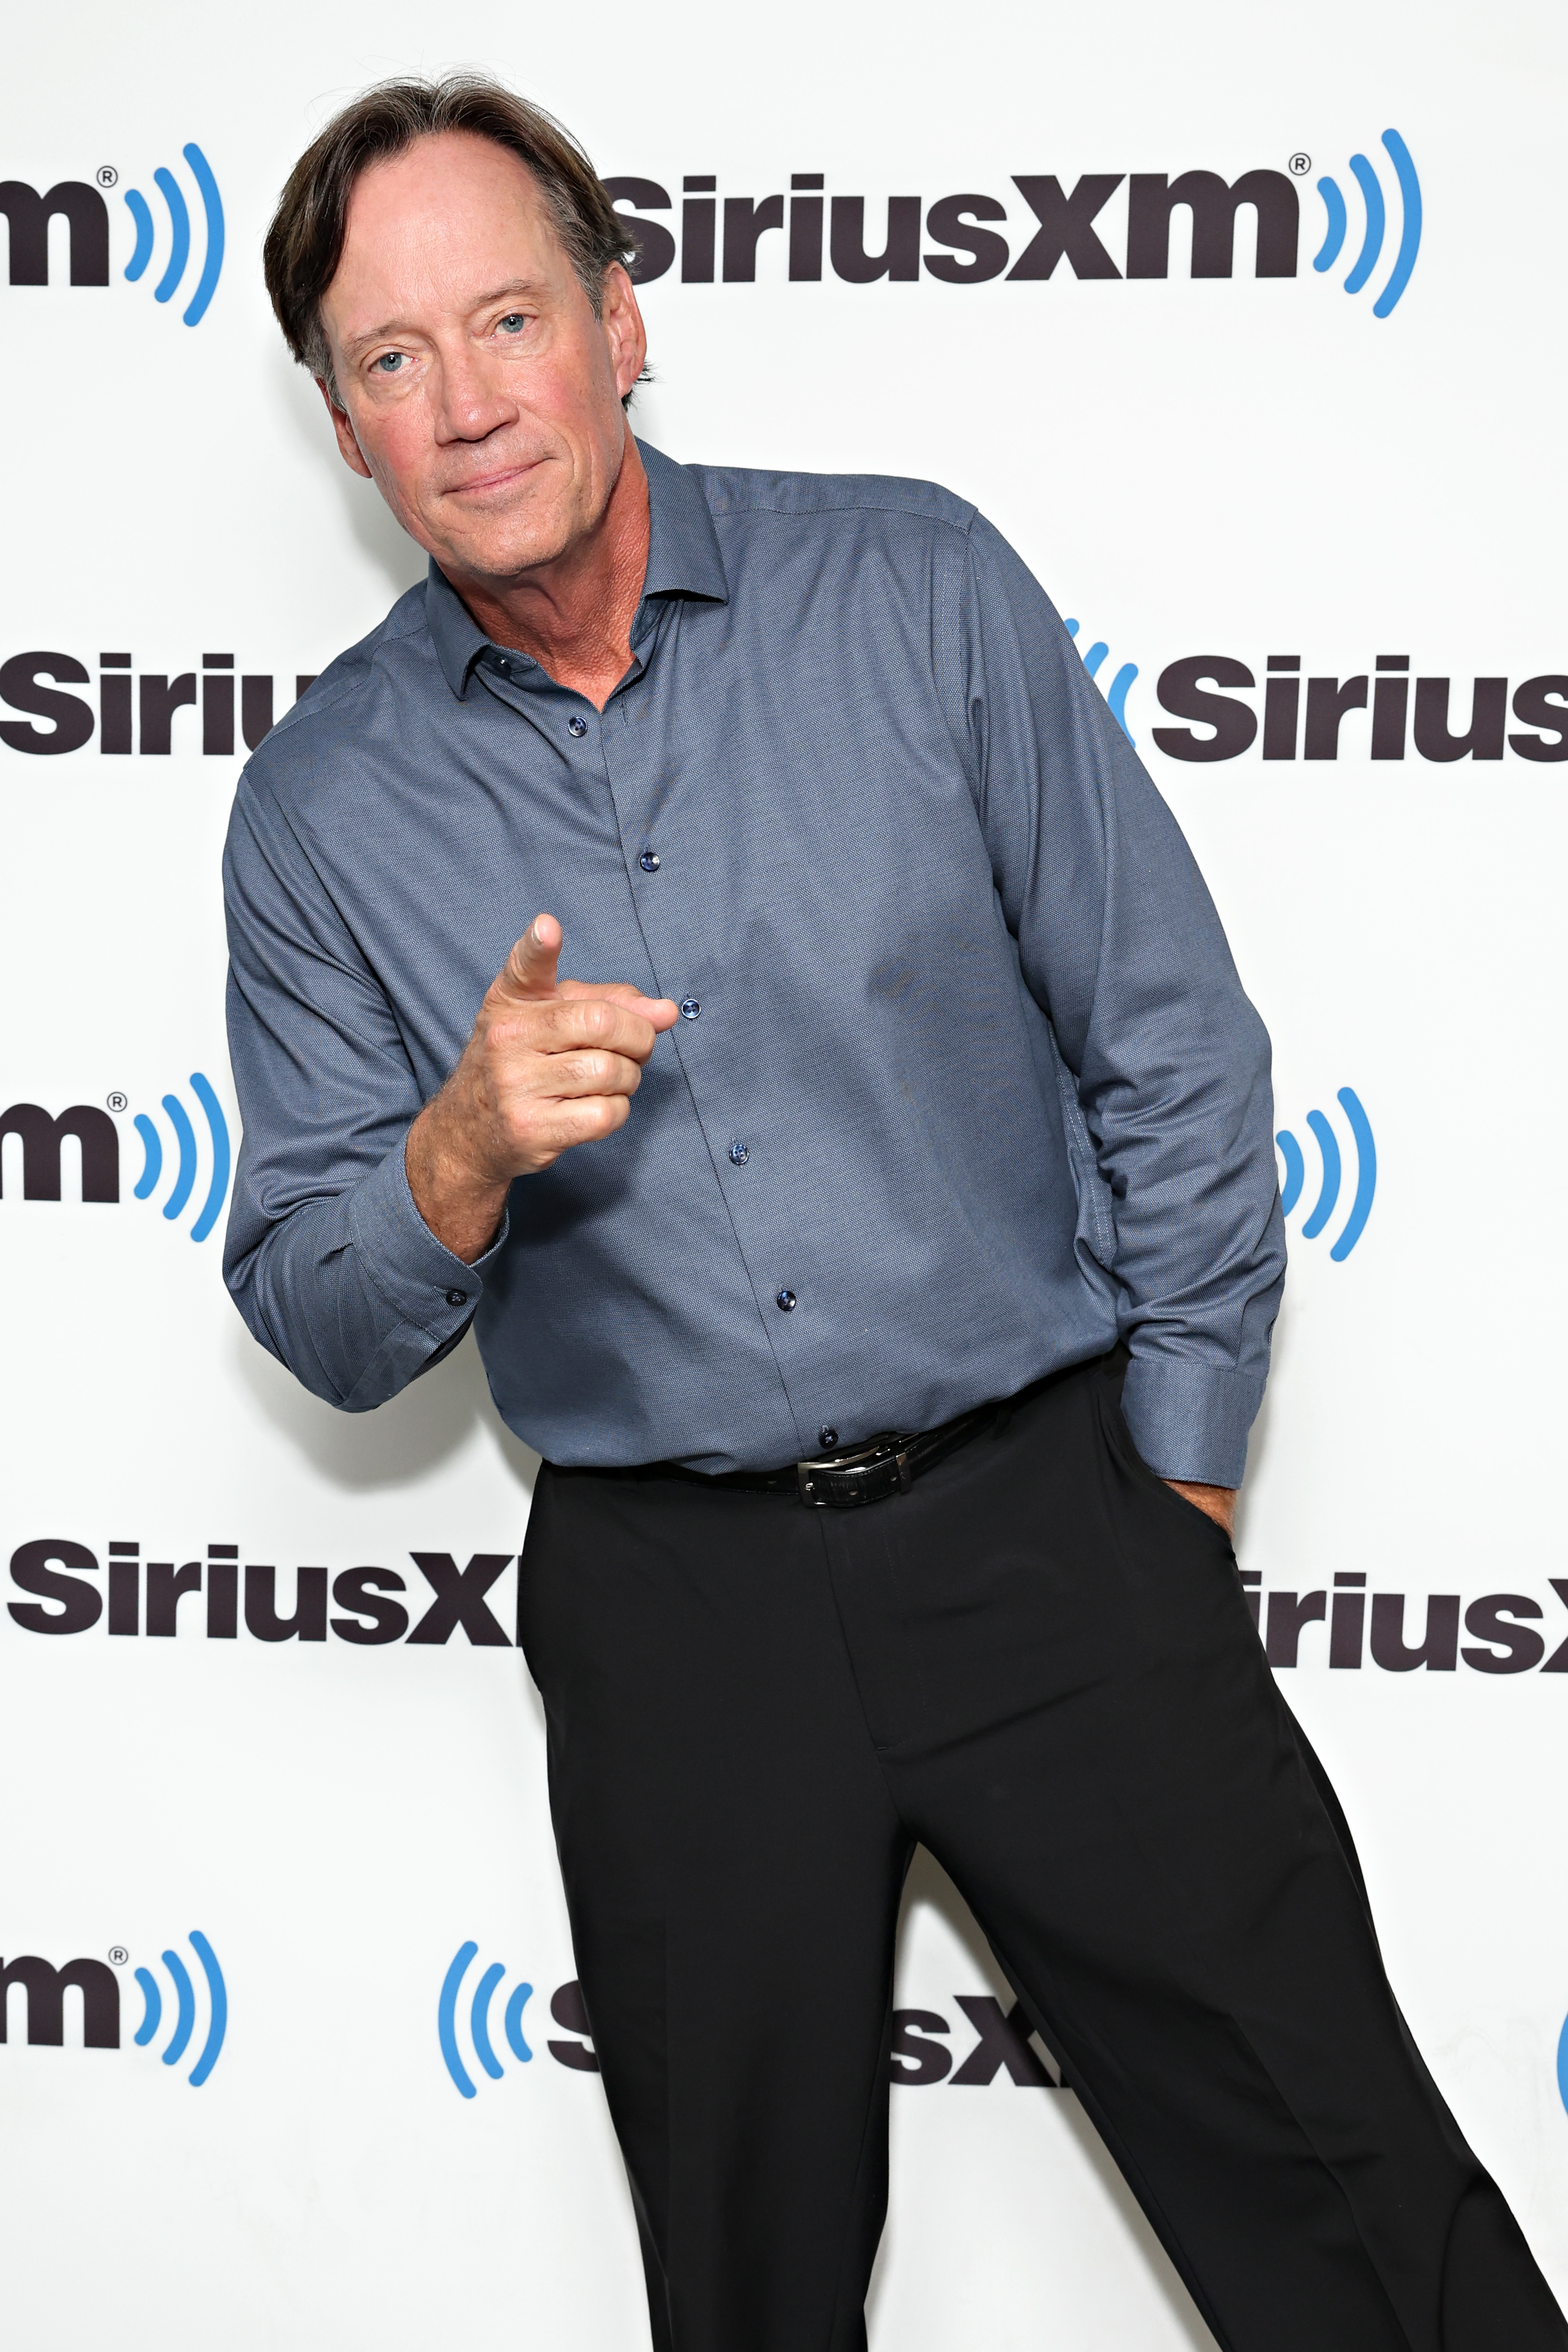 Kevin Sorbo in a blue shirt and black pants, pointing toward the camera at a SiriusXM event